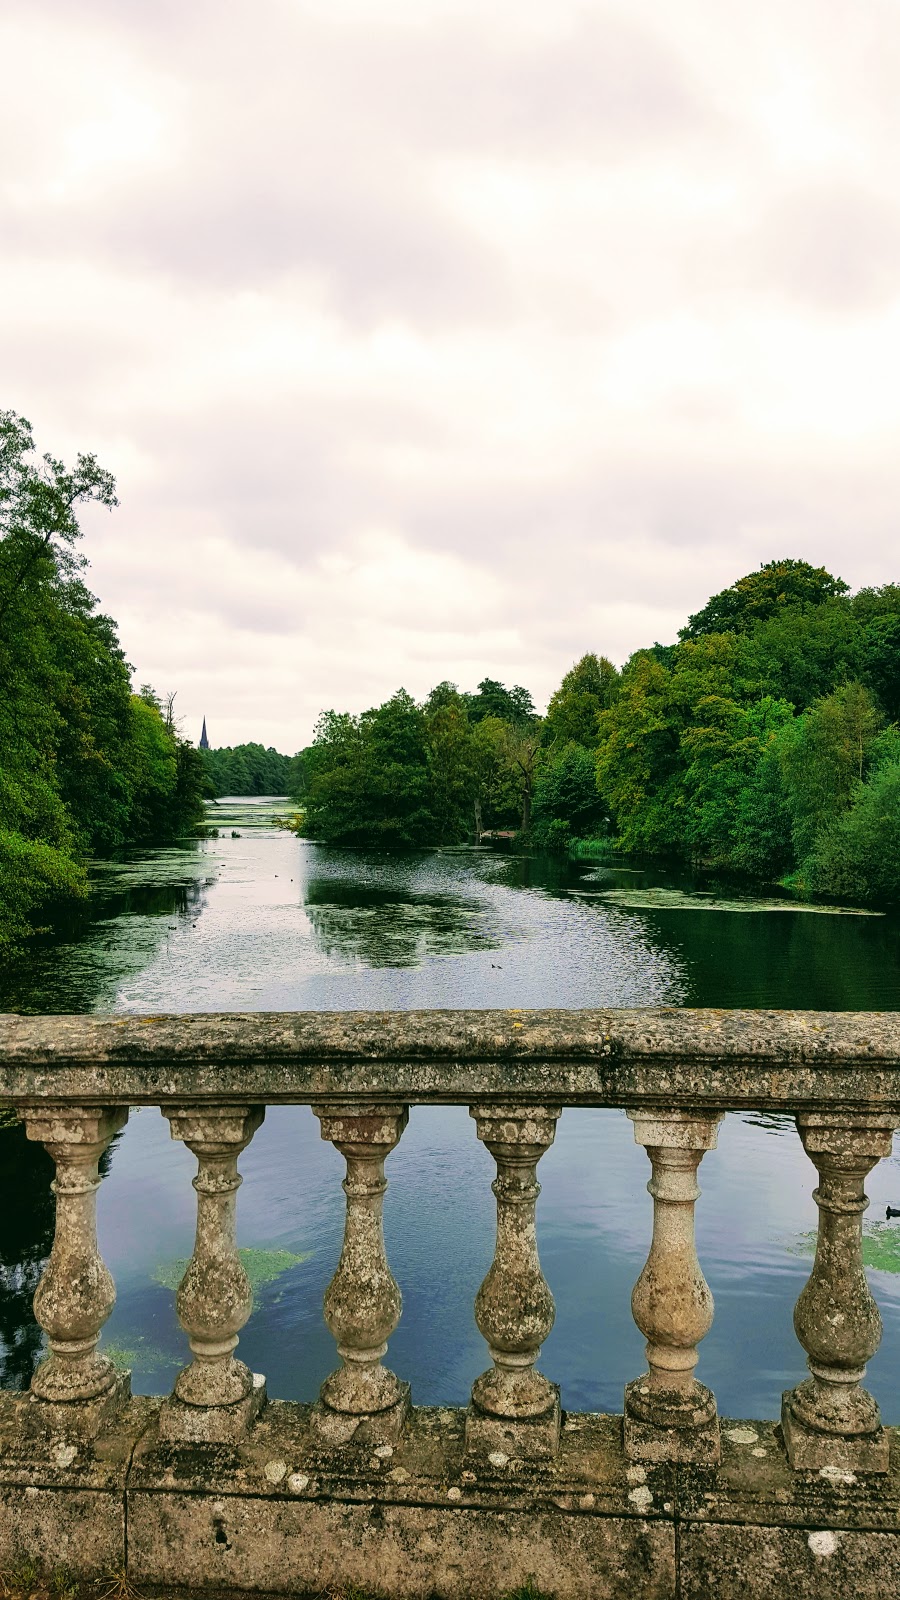 A Family Day Out In Clumber Park, Nottinghamshire